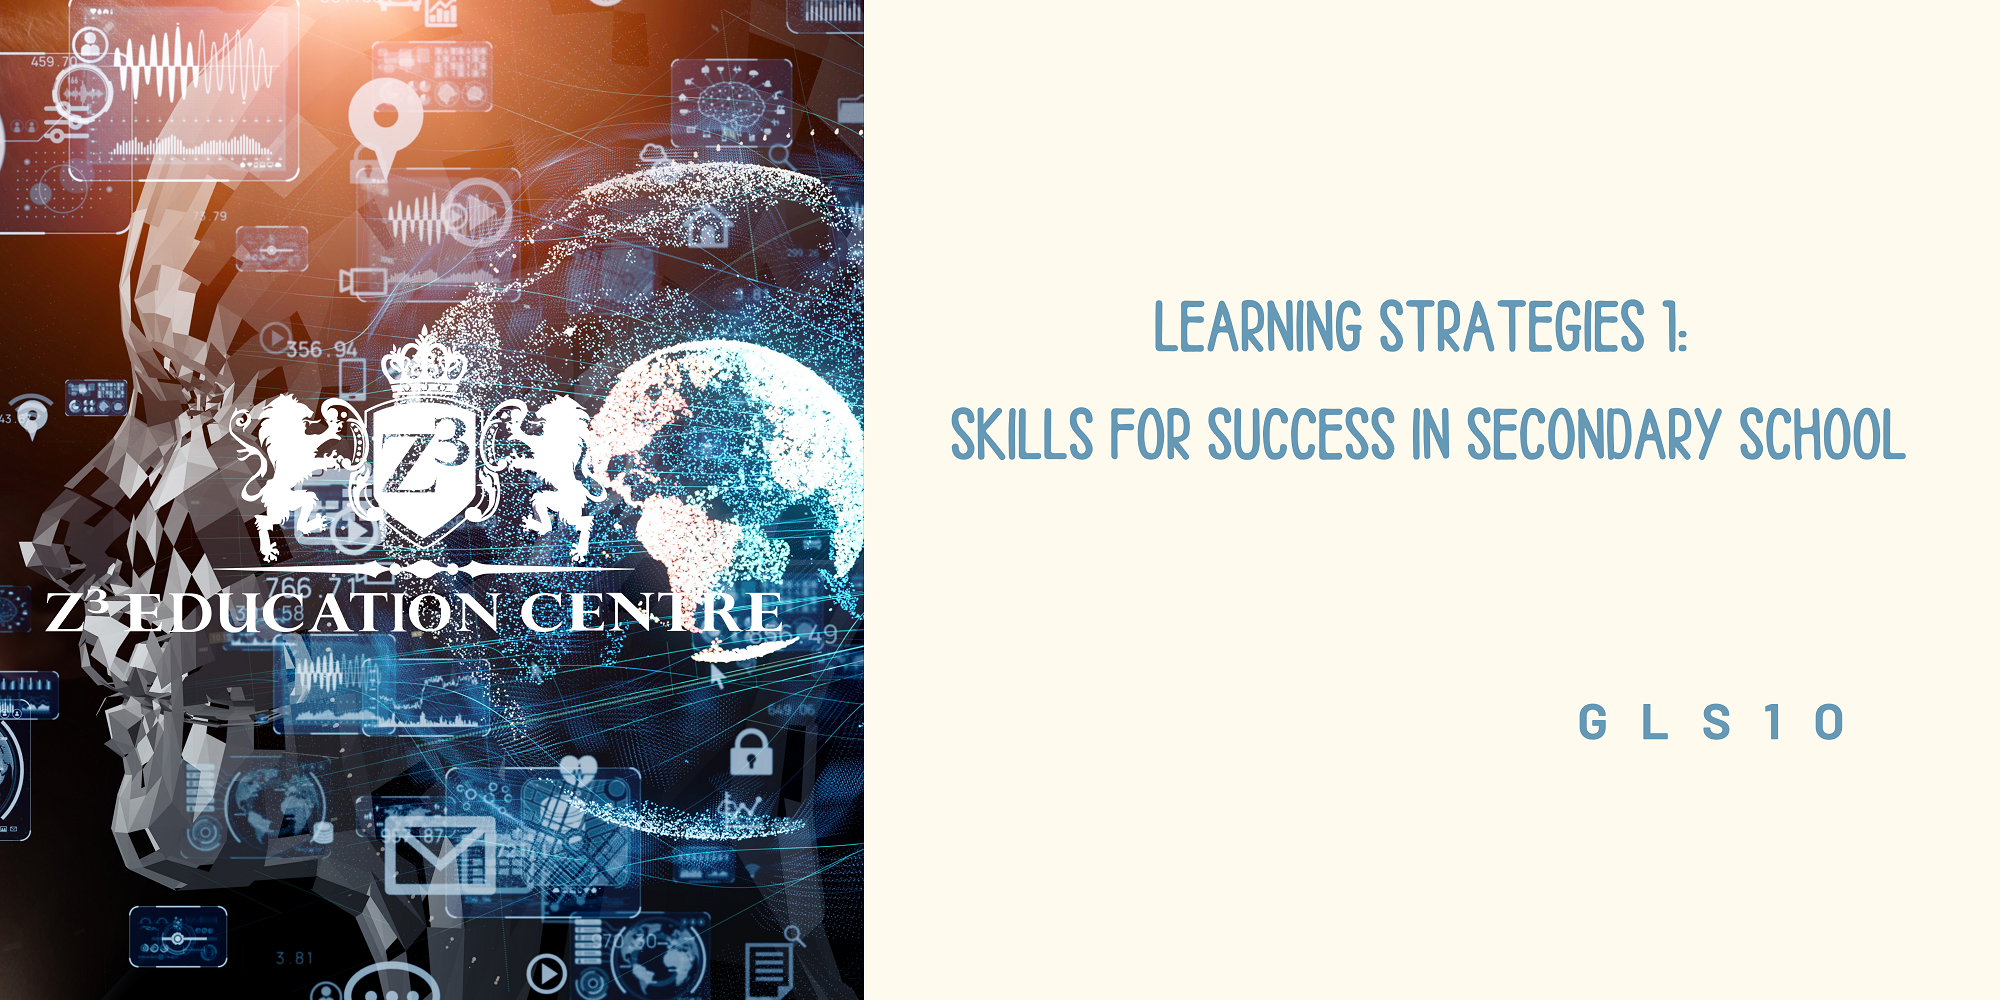 Learning Strategies 1: Skills for Success in Secondary School image